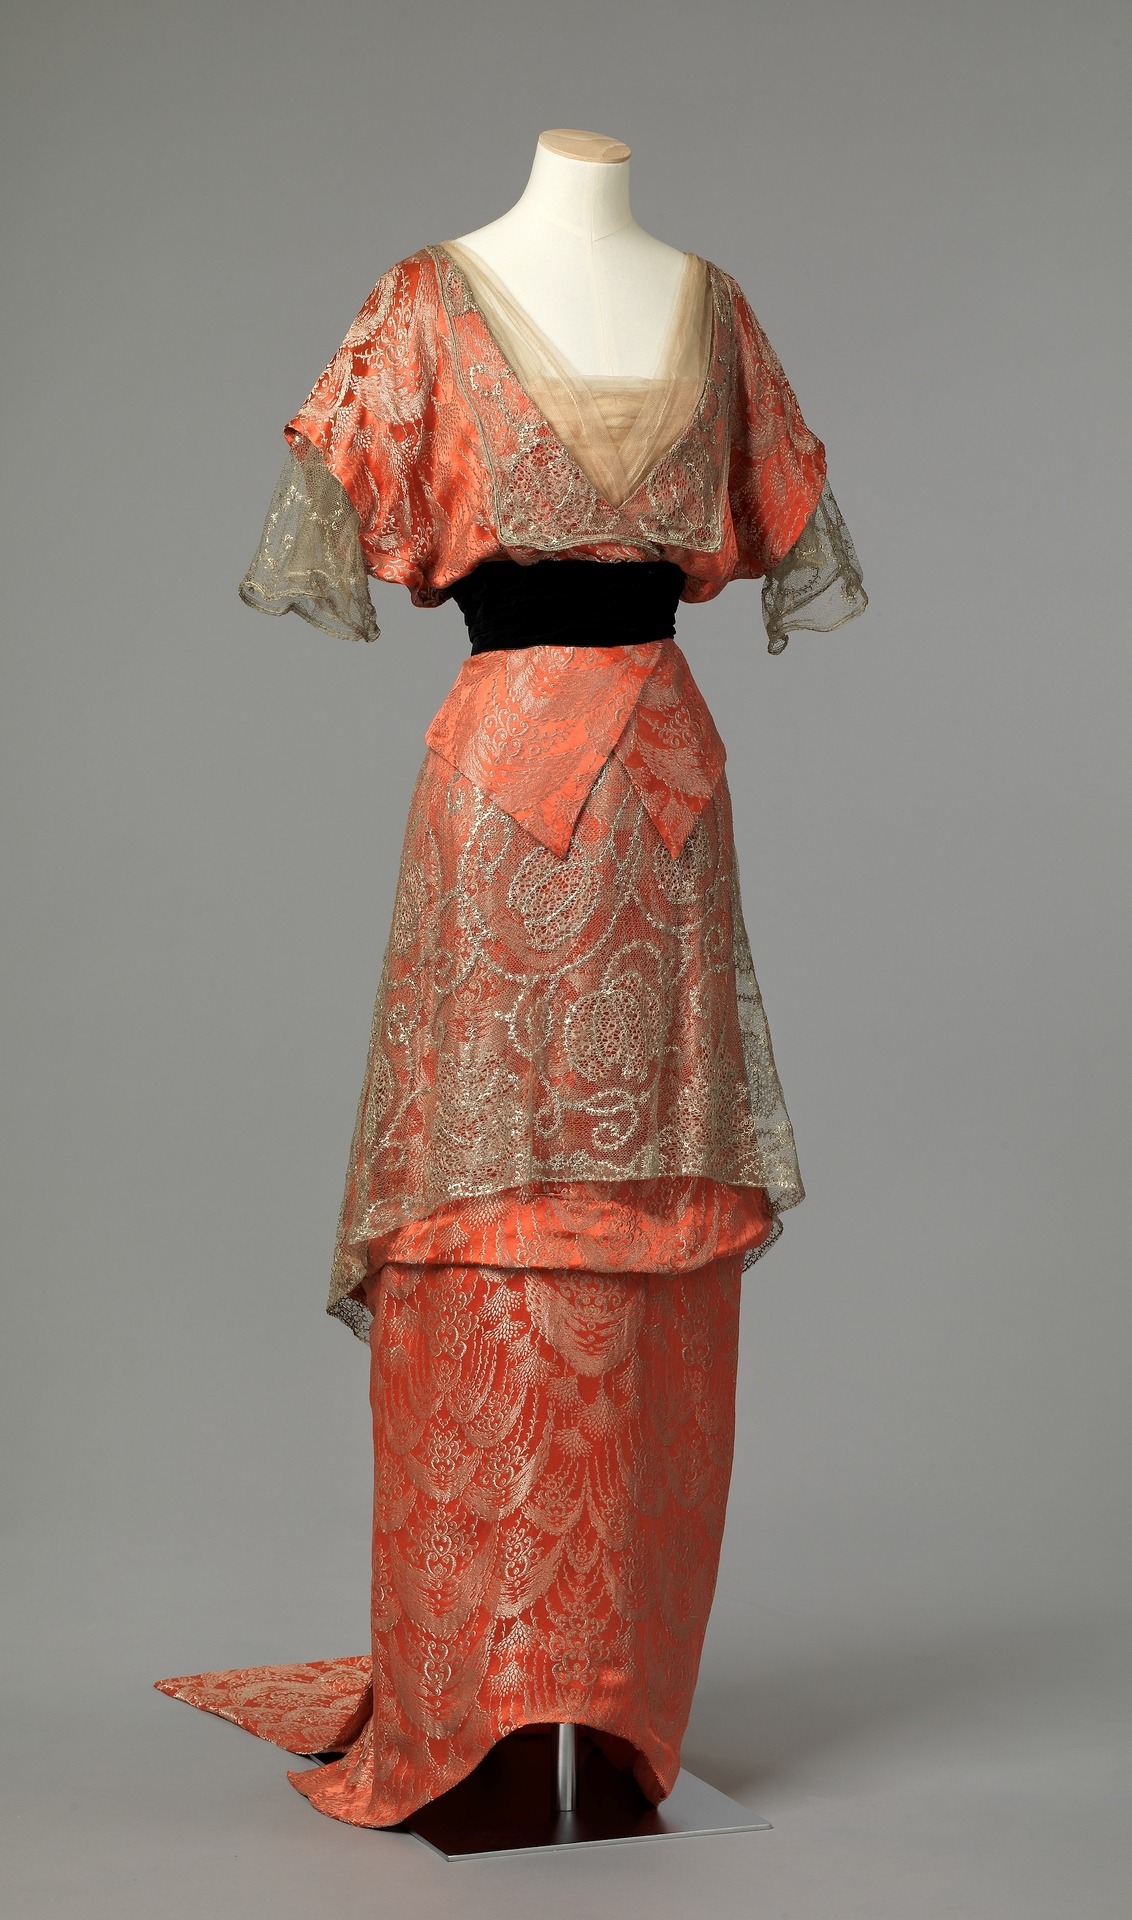 Evening dress by an unknown maker (possibly British),1913-1914, silk, linen, glass, metal, National Museum of Art, Architecture and Design, Oslo